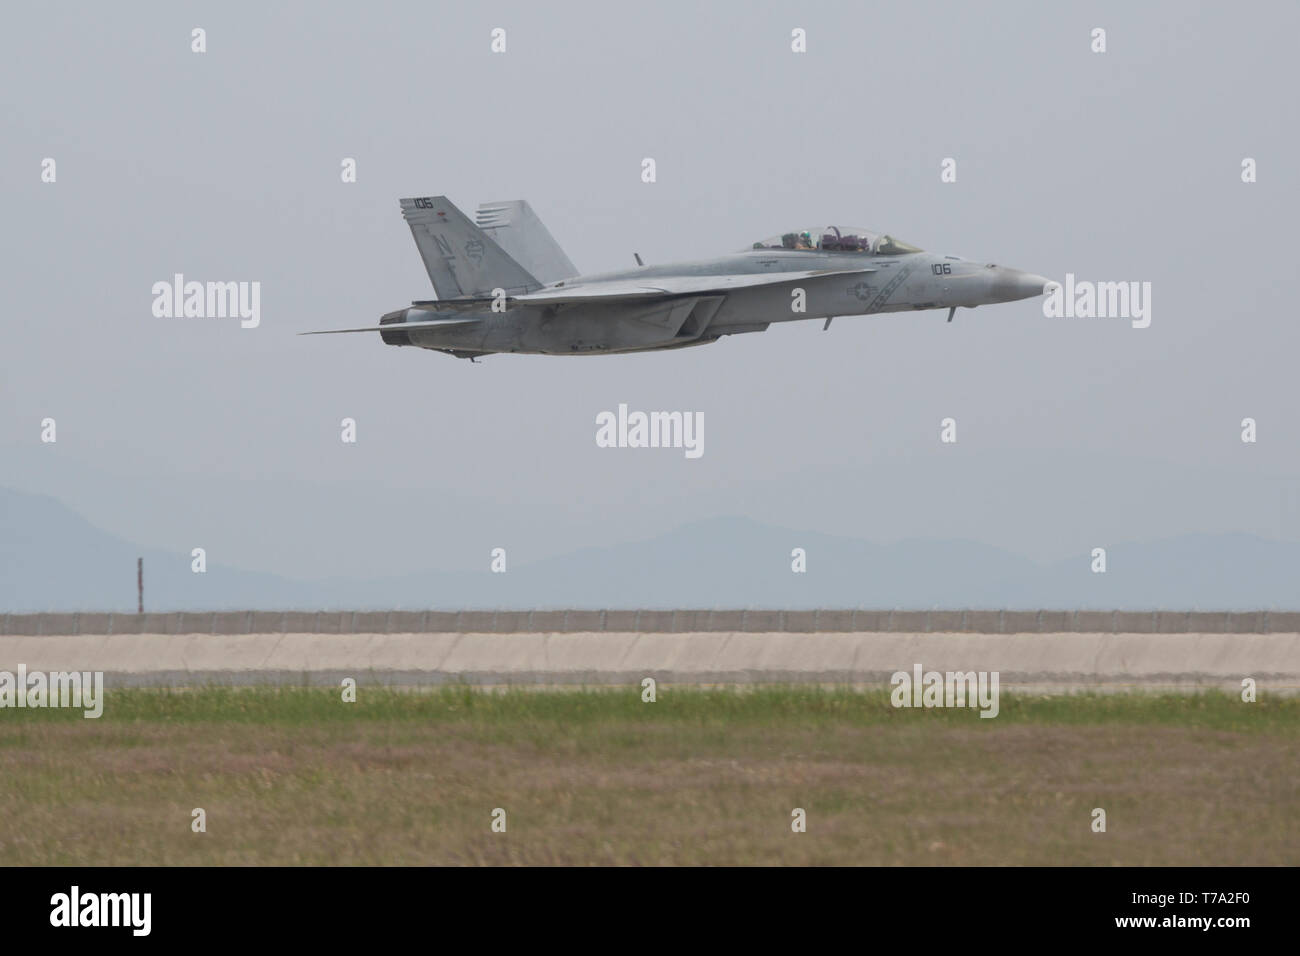 A Carrier Air Wing (CVW) 5 F/A-18F Super Hornet performs a flight demonstration during the 43rd Japan Maritime Self-Defense Force – Marine Corps Air Station Iwakuni Friendship Day at MCAS Iwakuni, Japan, May 5, 2019. This year was the first time that aircraft from CVW-5 participated in the air show since their arrival at MCAS Iwakuni. Since 1973, MCAS Iwakuni has held a single-day air show designed to foster positive relationships and offer an exciting experience that displays the communal support between the U.S. and Japan. The air show encompassed various U.S. and Japanese static display air Stock Photo